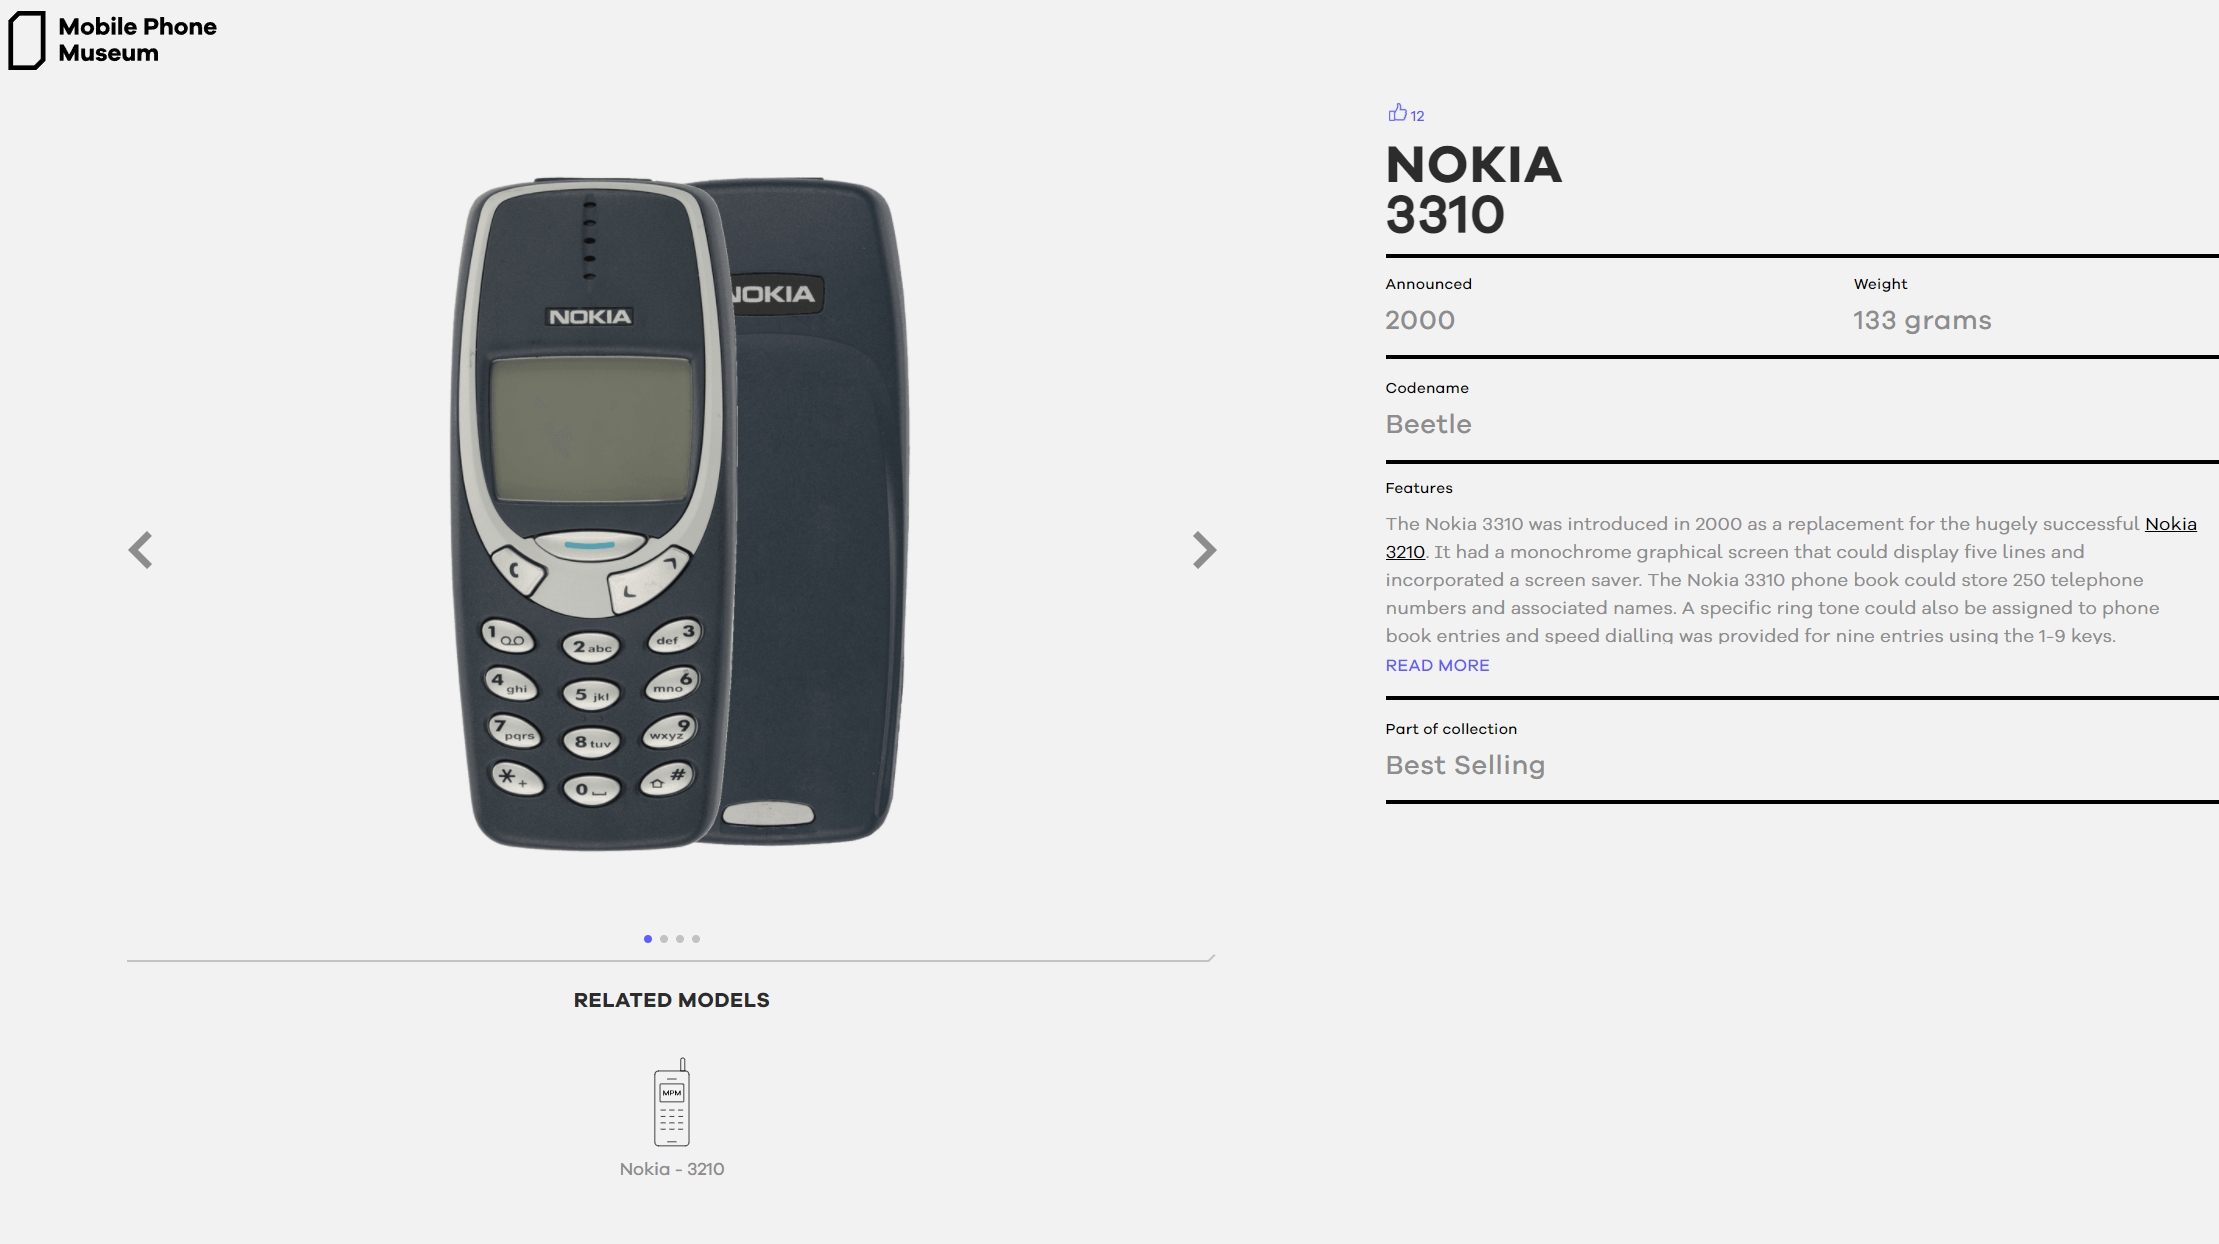 An image of the Nokia 3310 on the Mobile Phone Museum